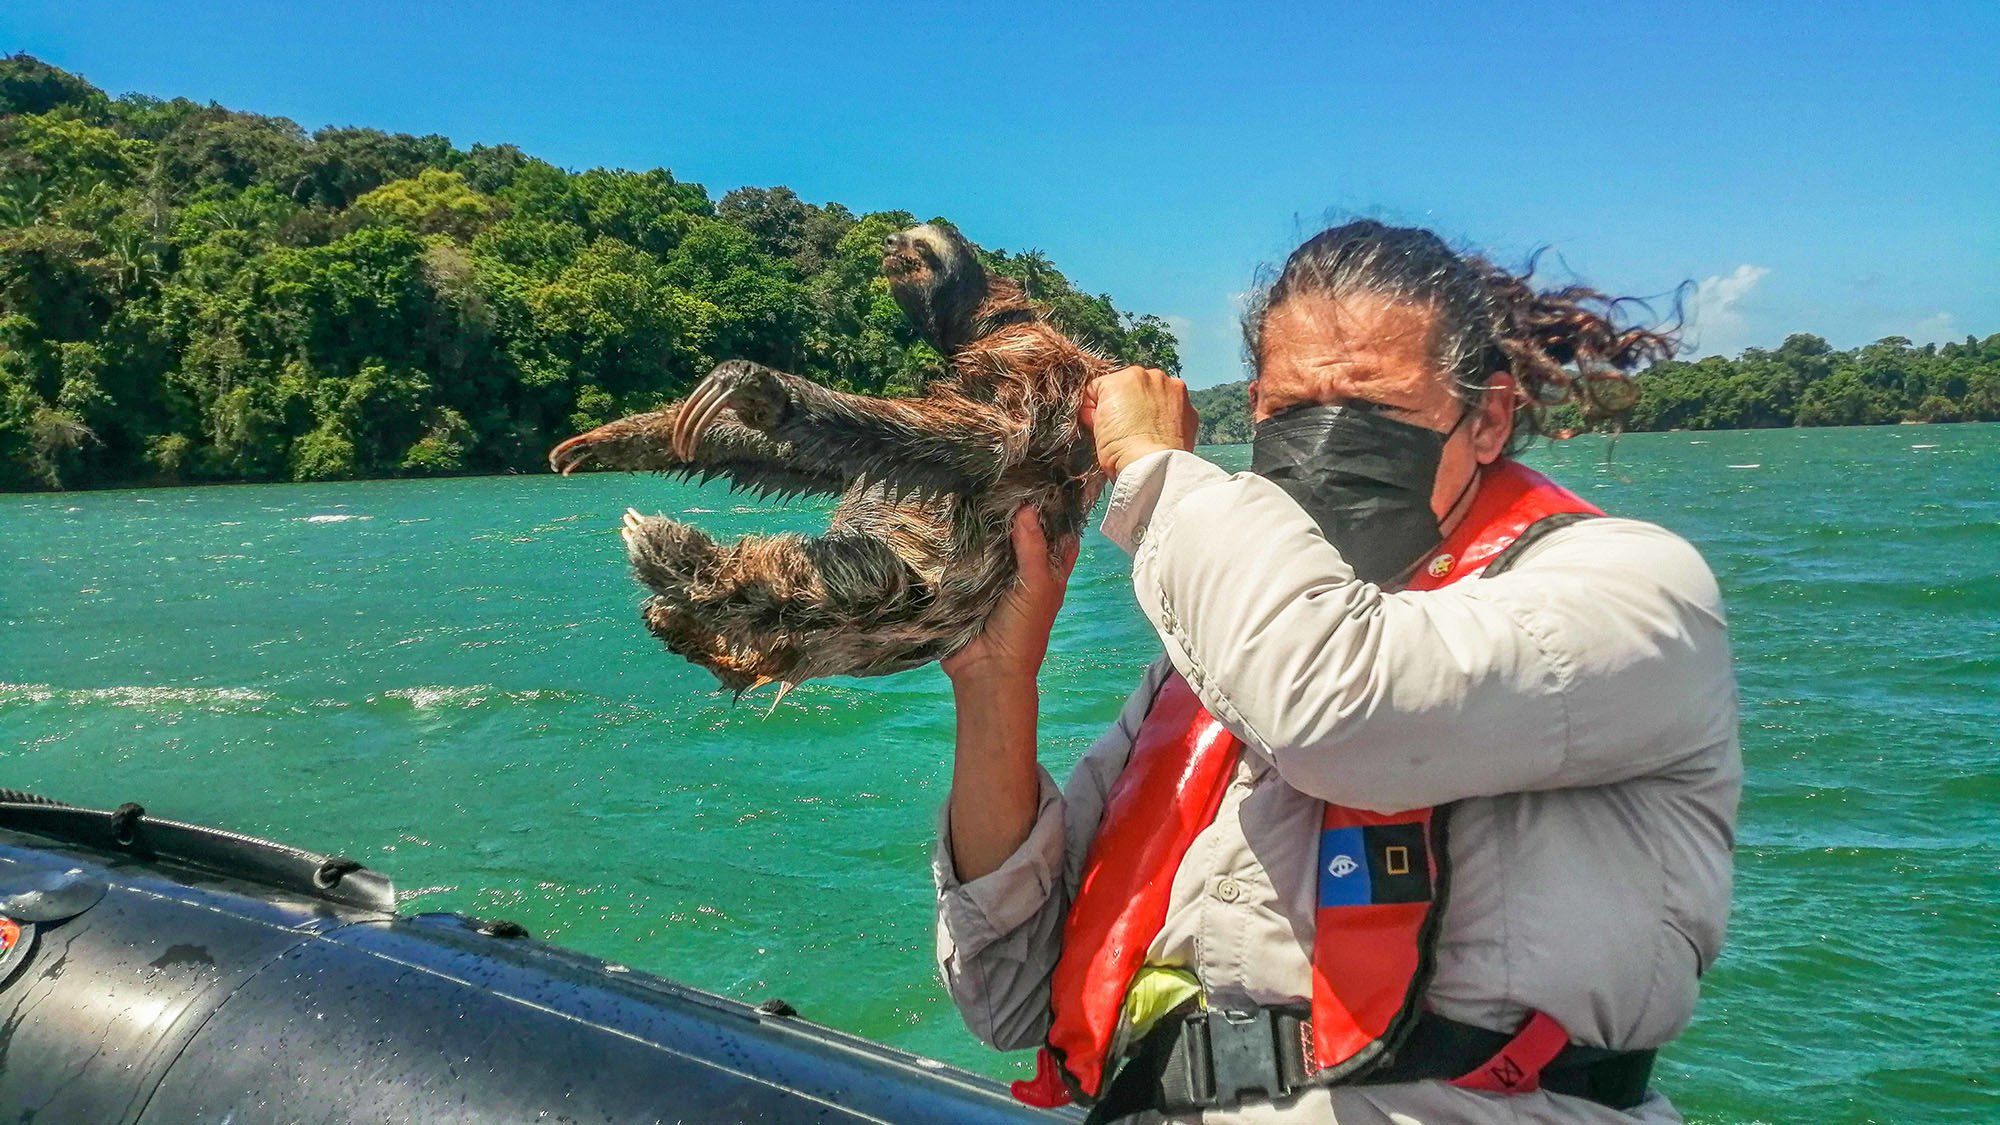 naturalist rescuing a sloth